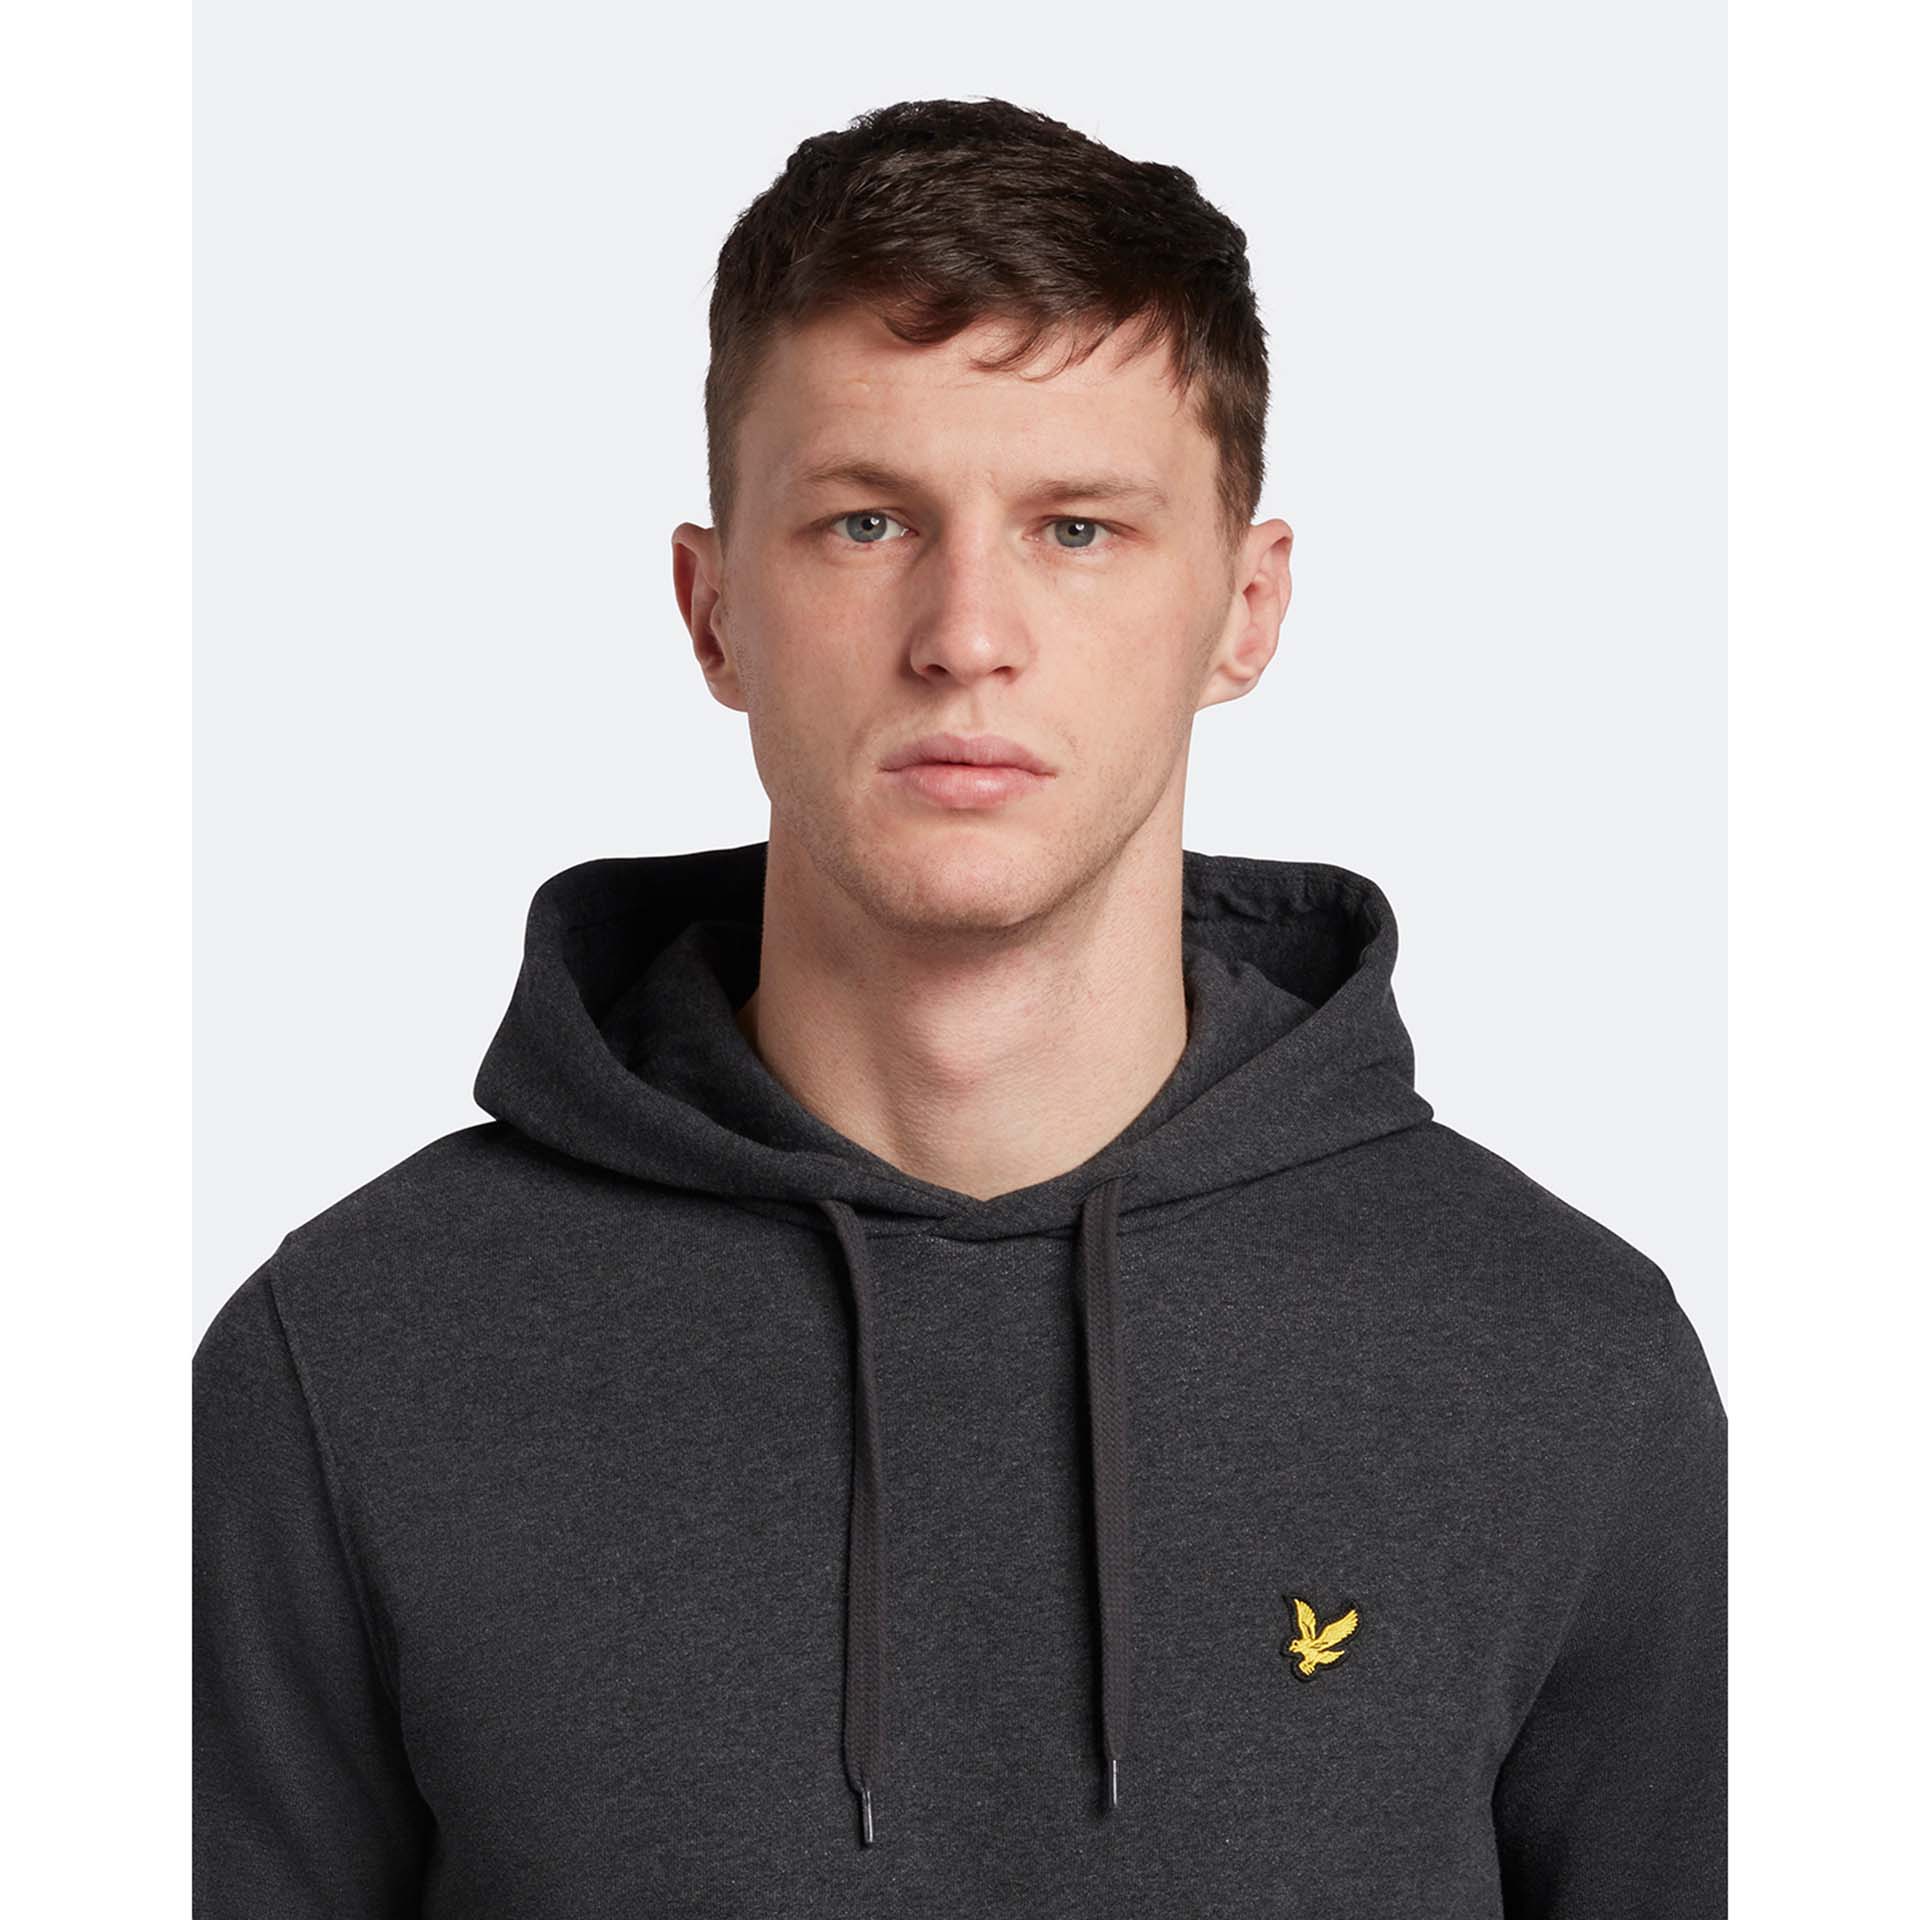 Lyle & Scott Pullover Hoodie Charcoal Marl